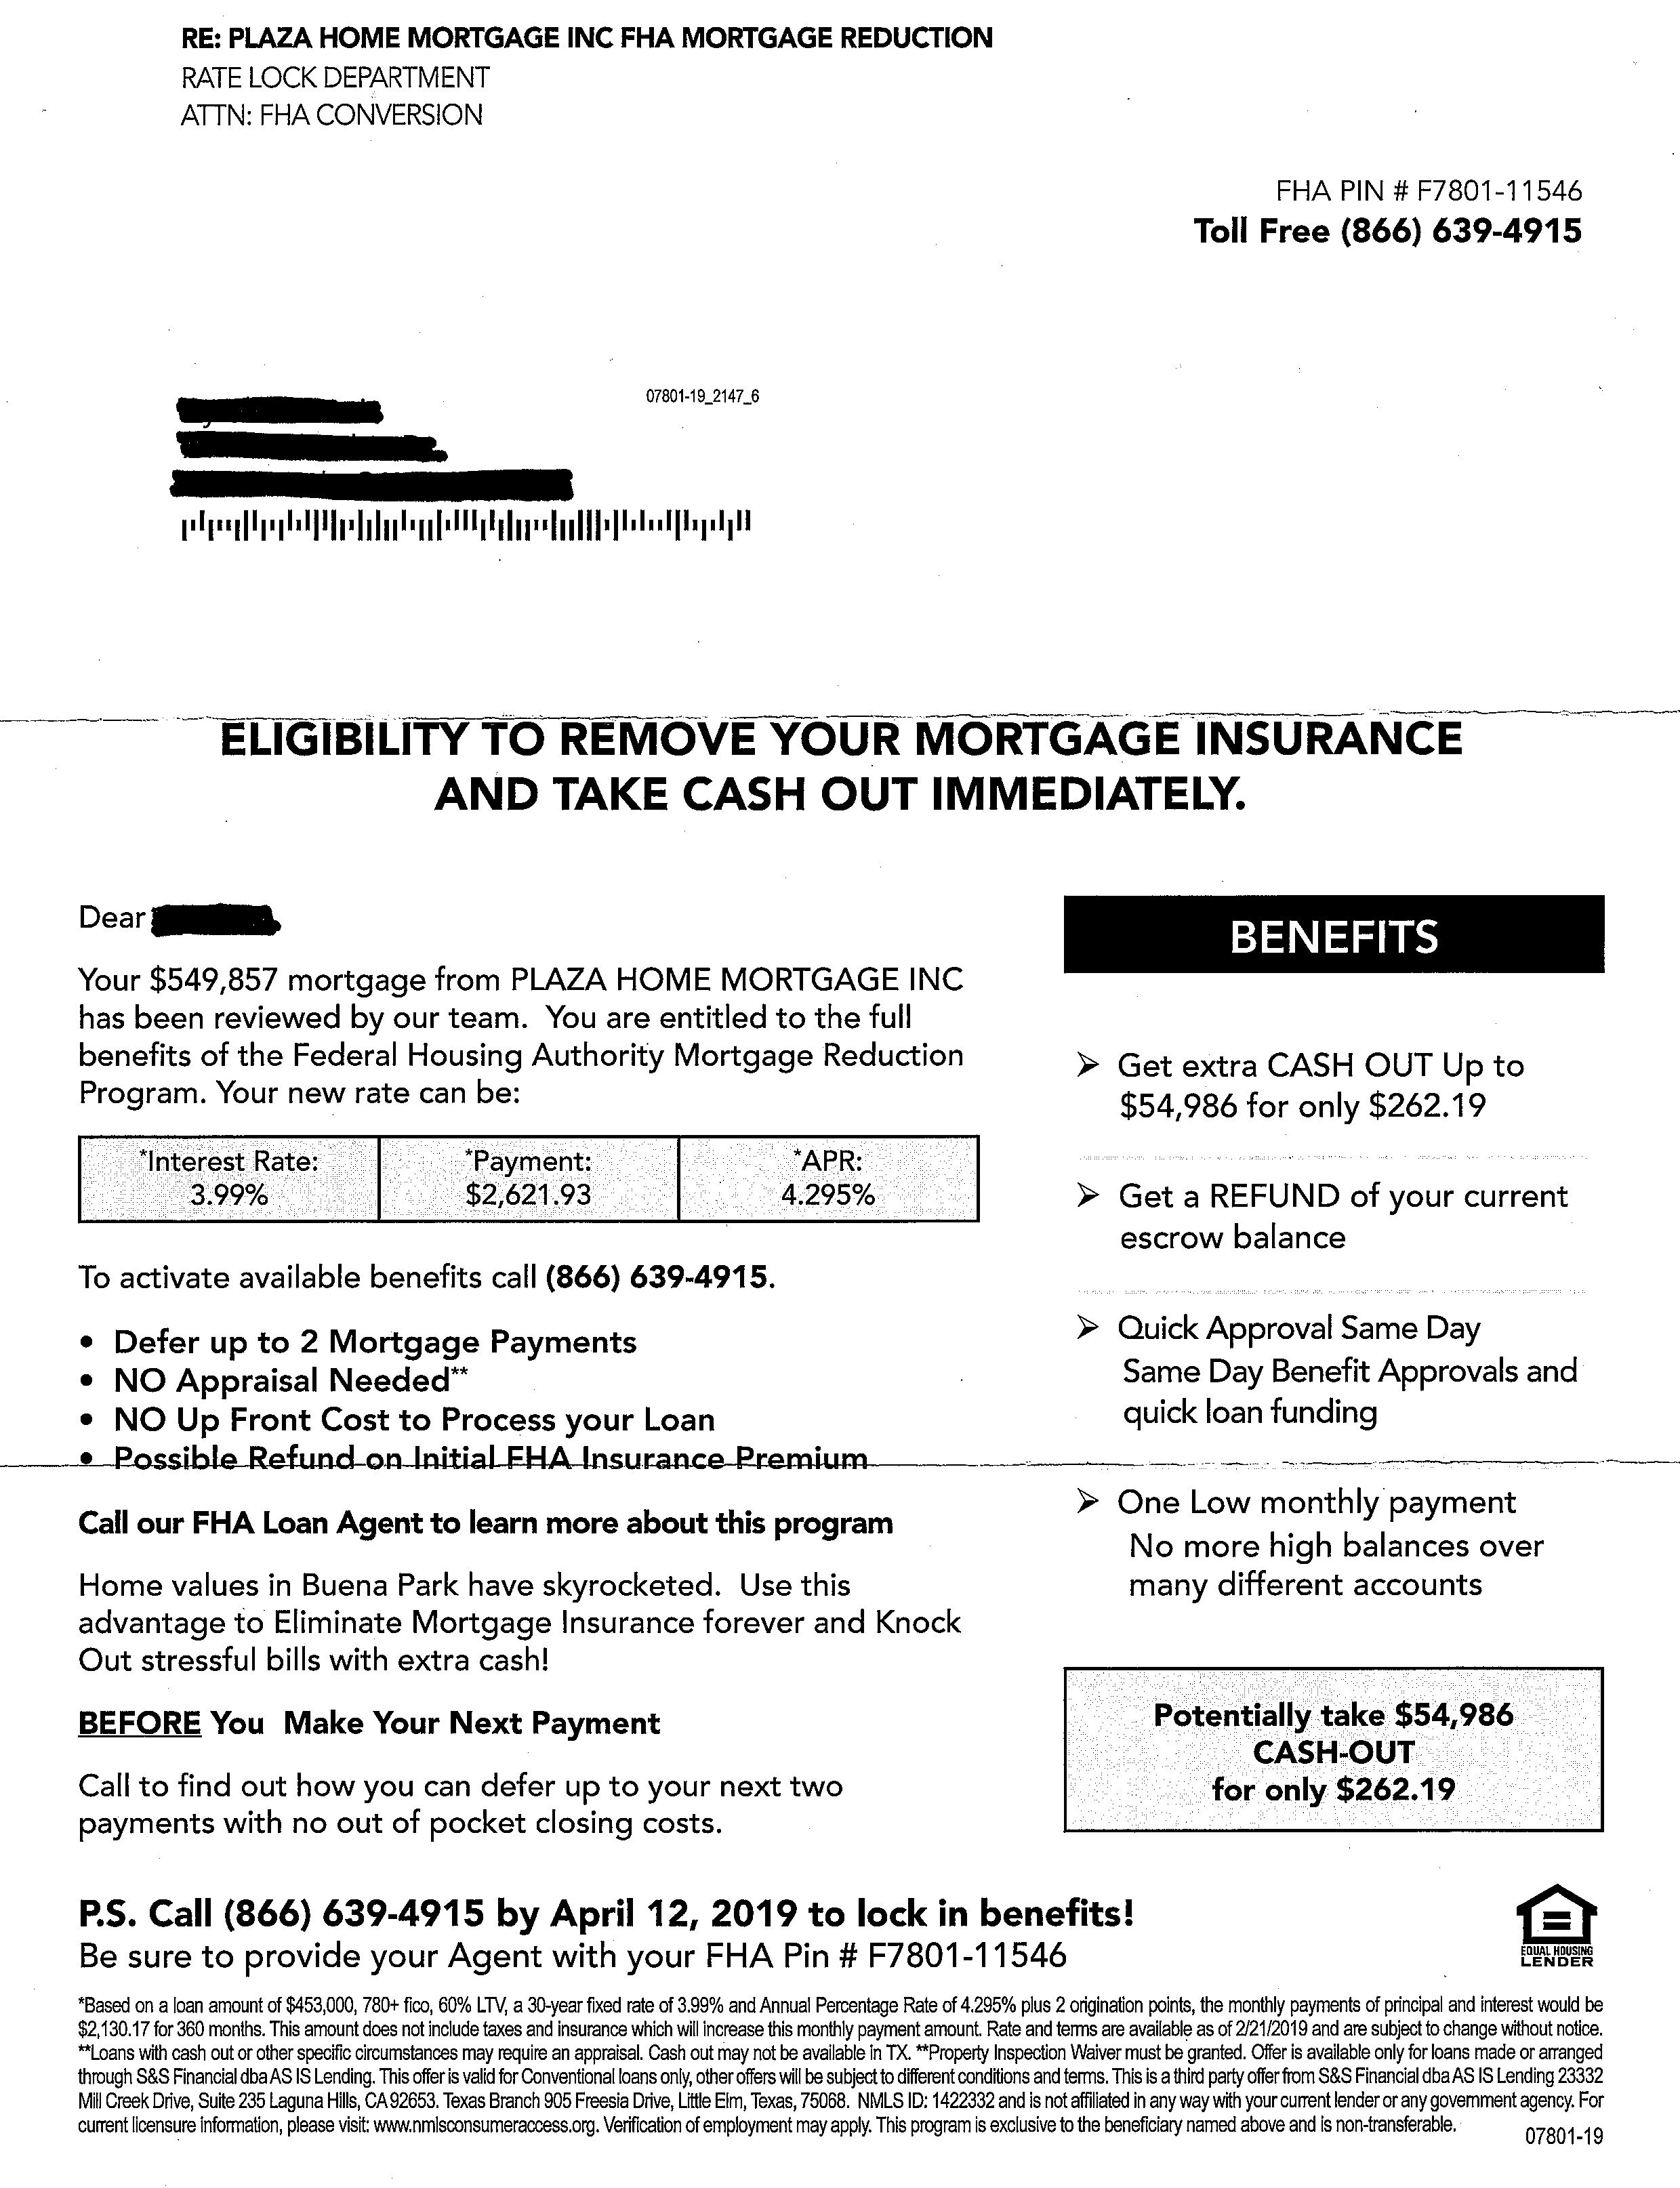 Federal Housing Authority Mortgage Mailing.jpg